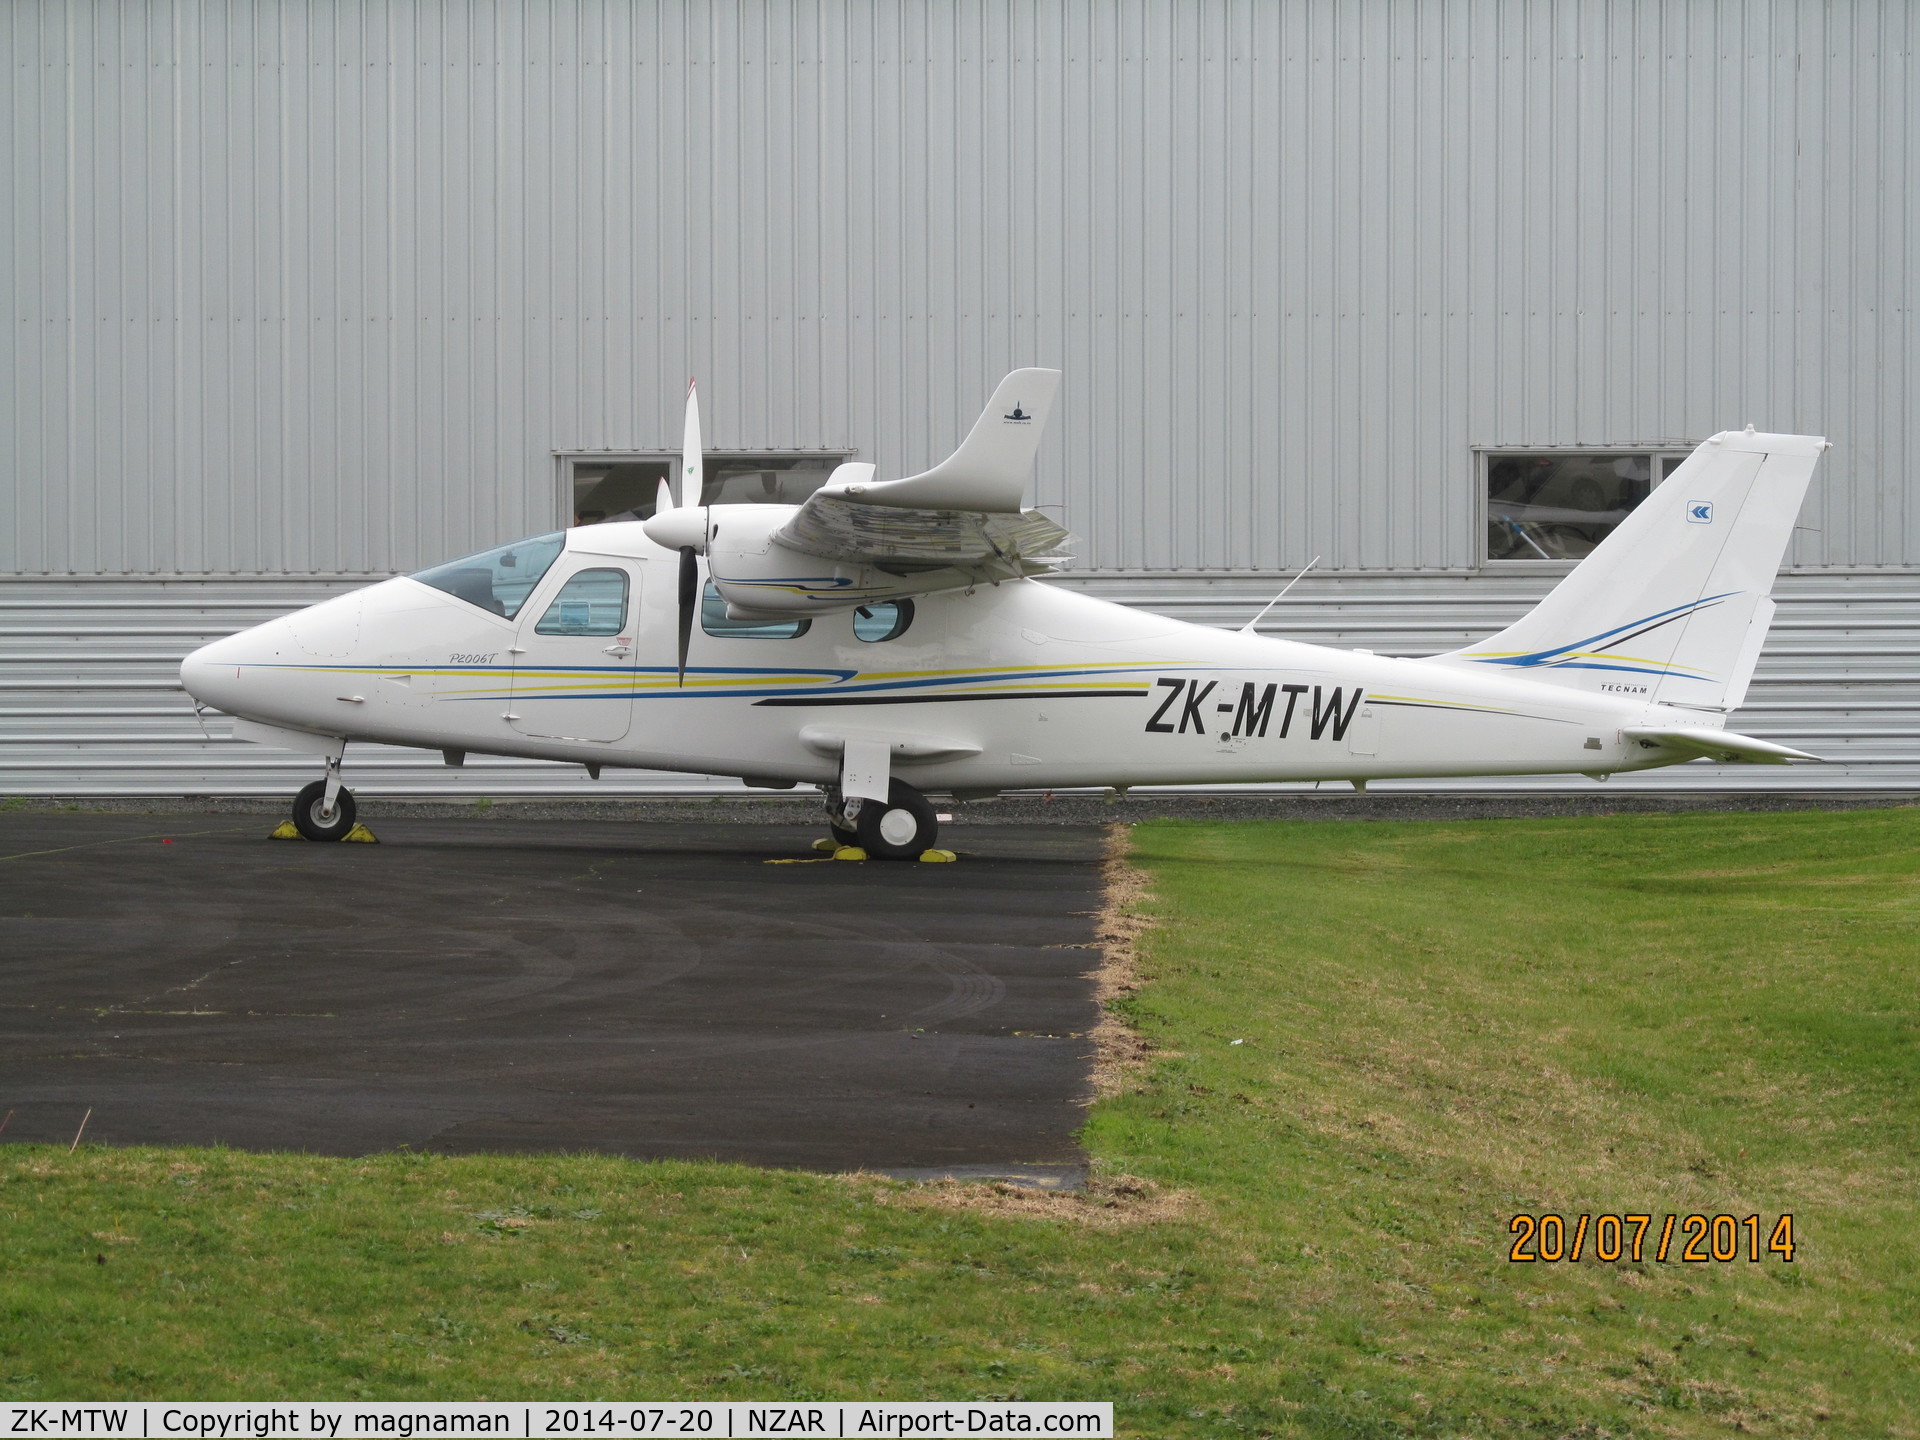 ZK-MTW, 2011 Tecnam P-2006T C/N 065, not in usual place today - nice to get a good photo